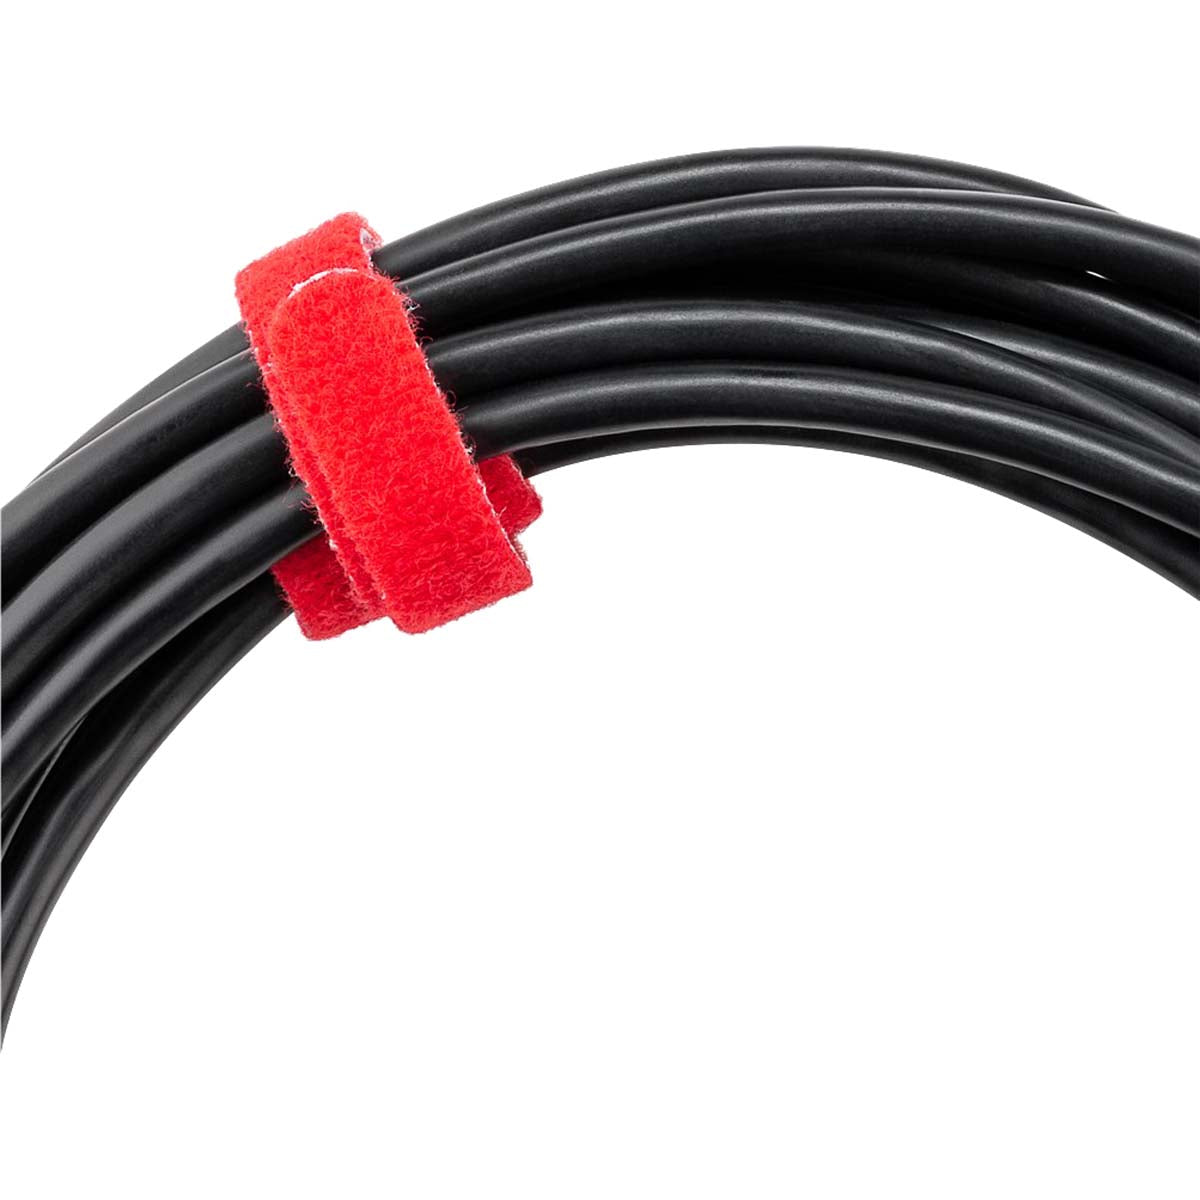 Goobay Cable Management Hook & Loop Set - Red, Yellow and Blue.